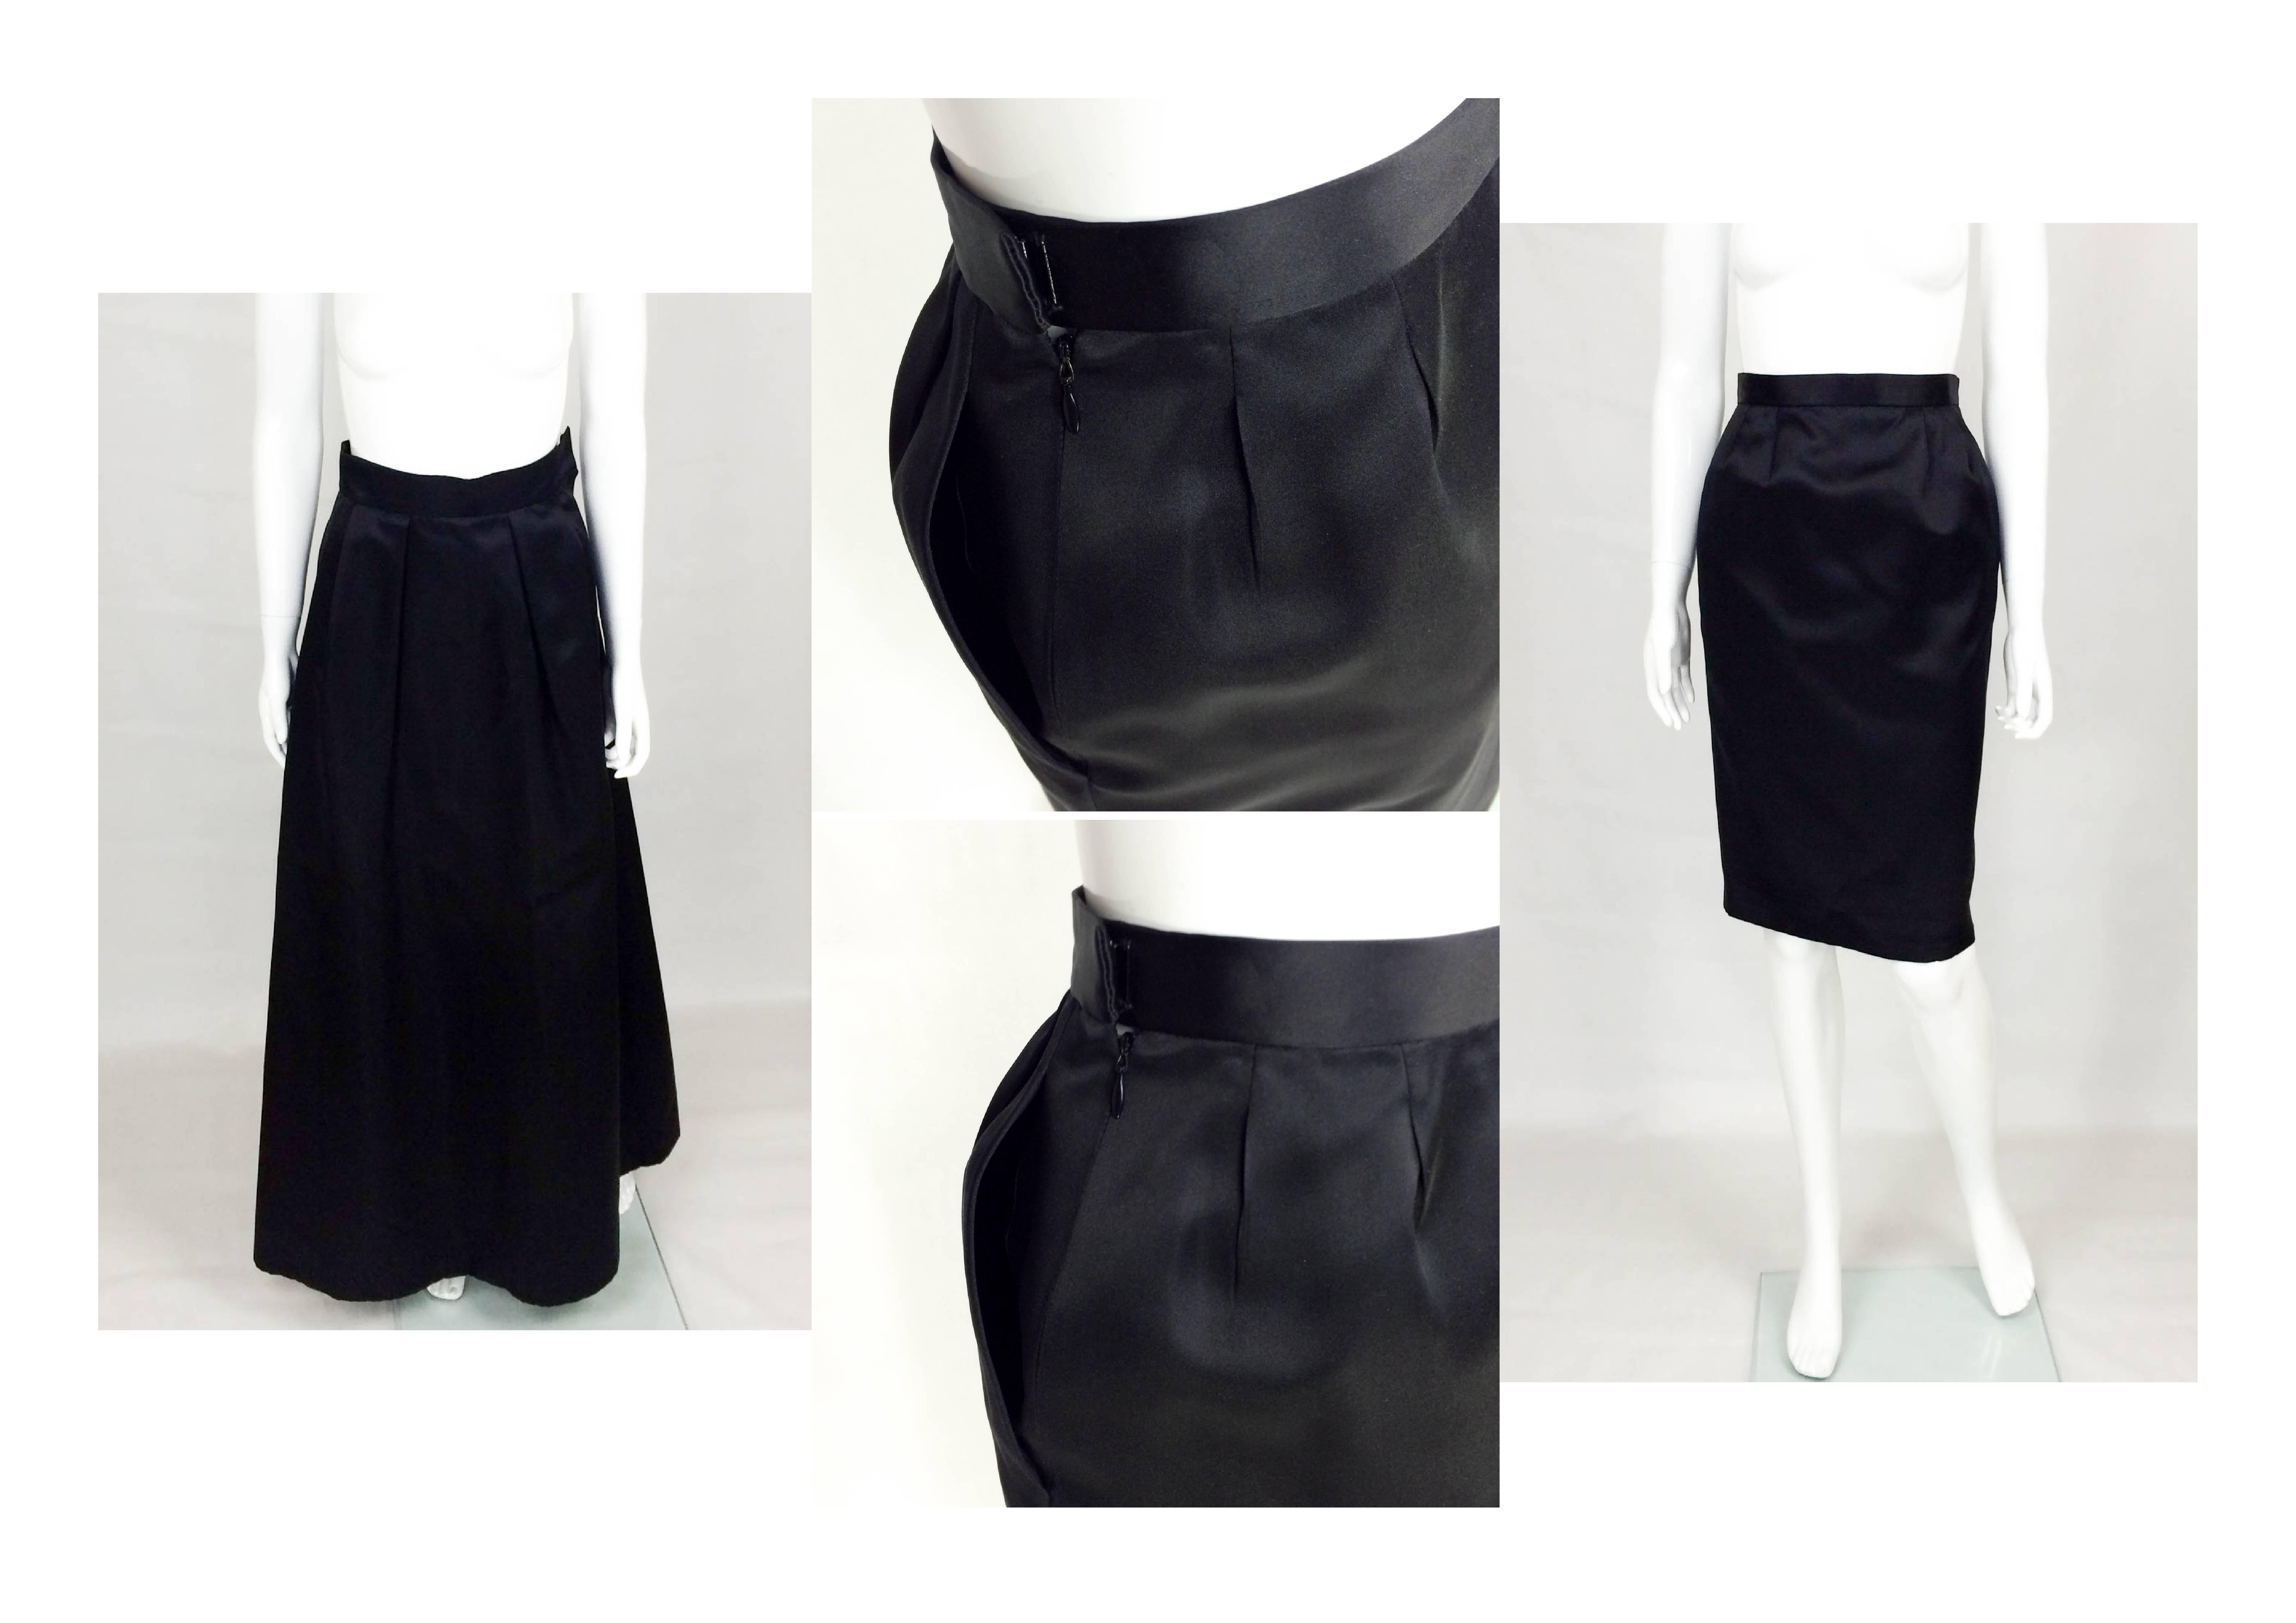 Yves Saint Laurent Le Smoking Sequin Jacket, Long and Short Satin Skirts - 1980 For Sale 4